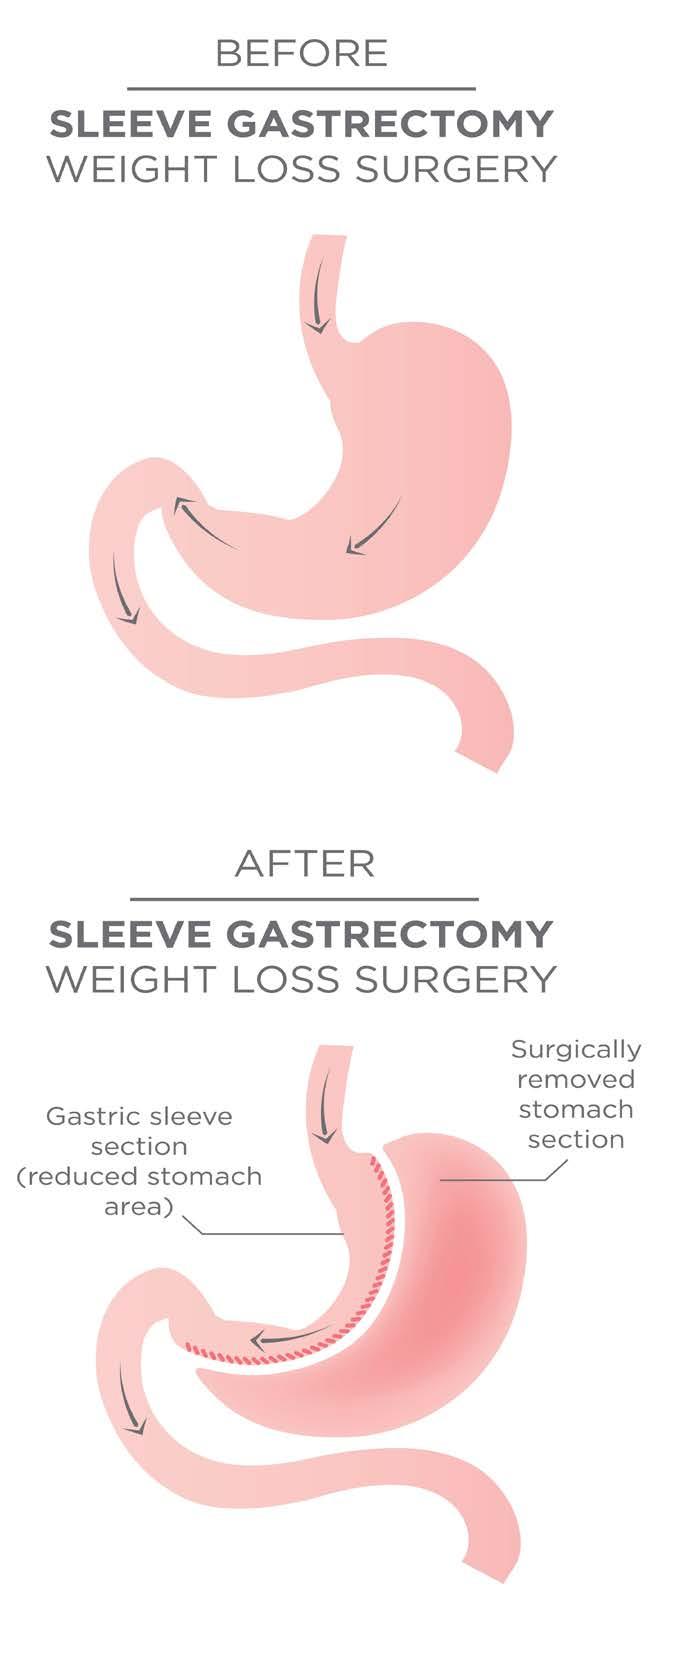 6 SLEEVE GASTRECTOMY The Laparoscopic Sleeve Gastrectomy often called the sleeve is performed by removing approximately 80 percent of the stomach.